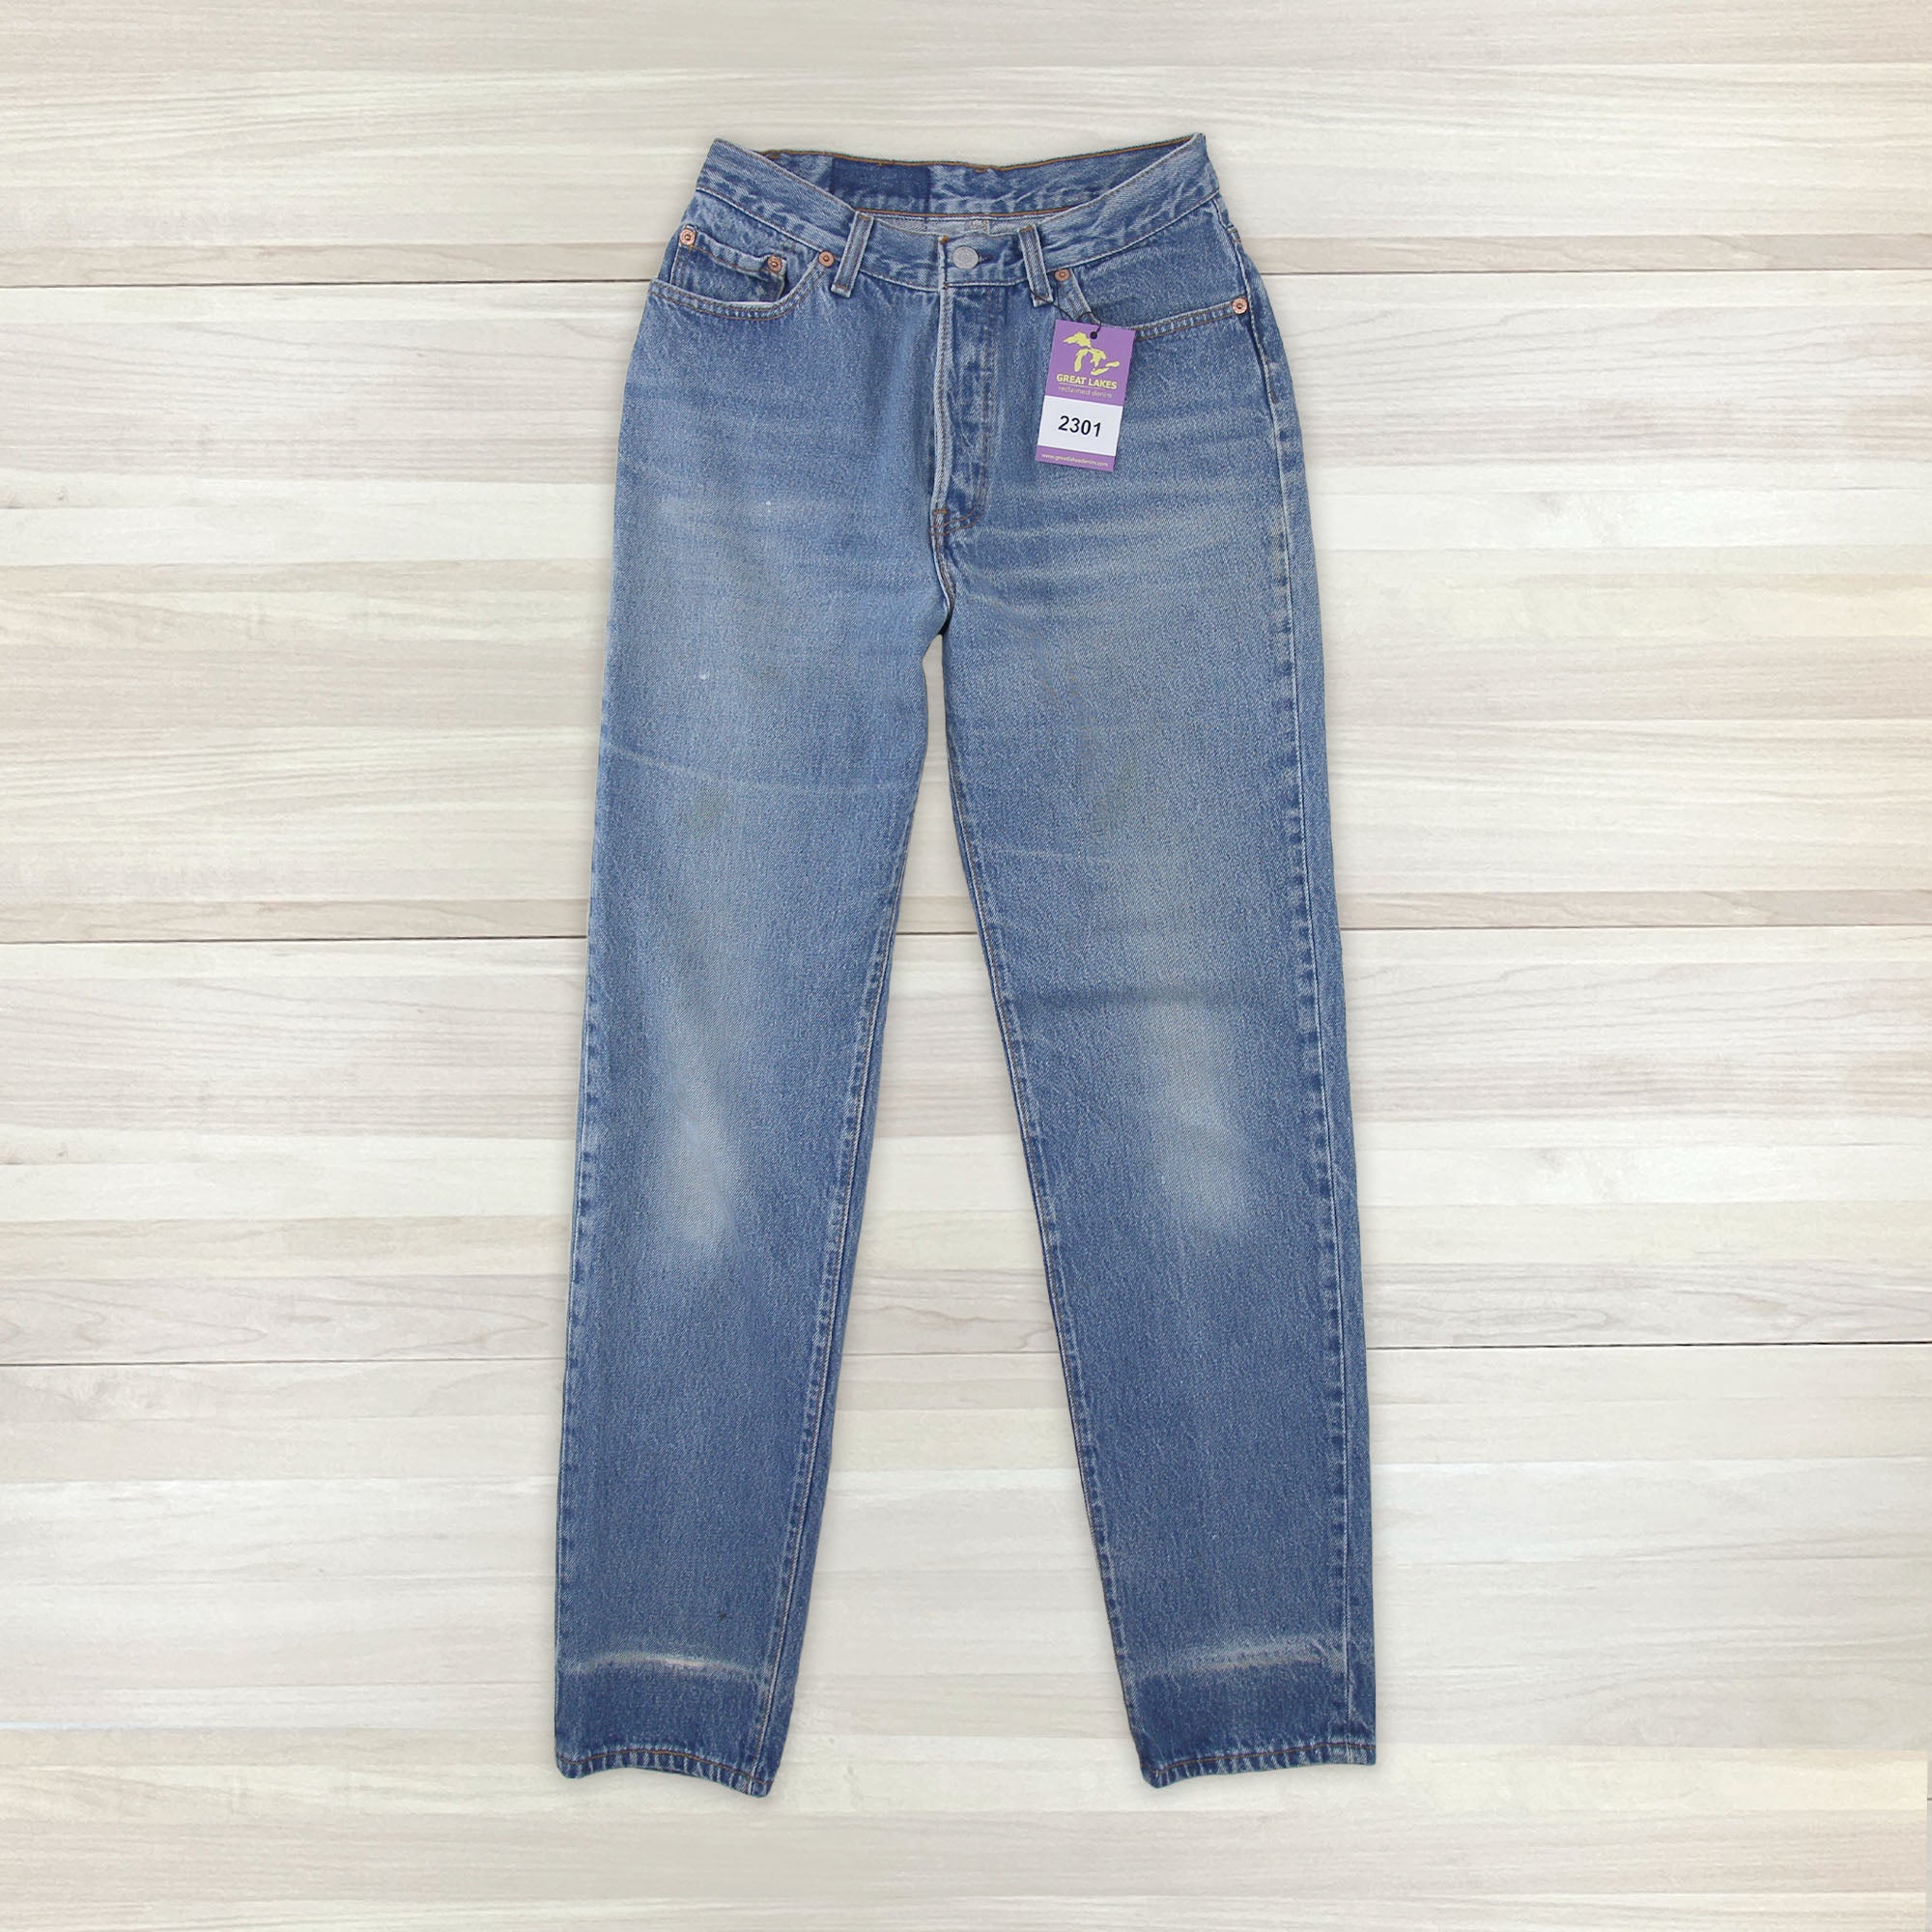 Women's Collection at Great Lakes Reclaimed Denim